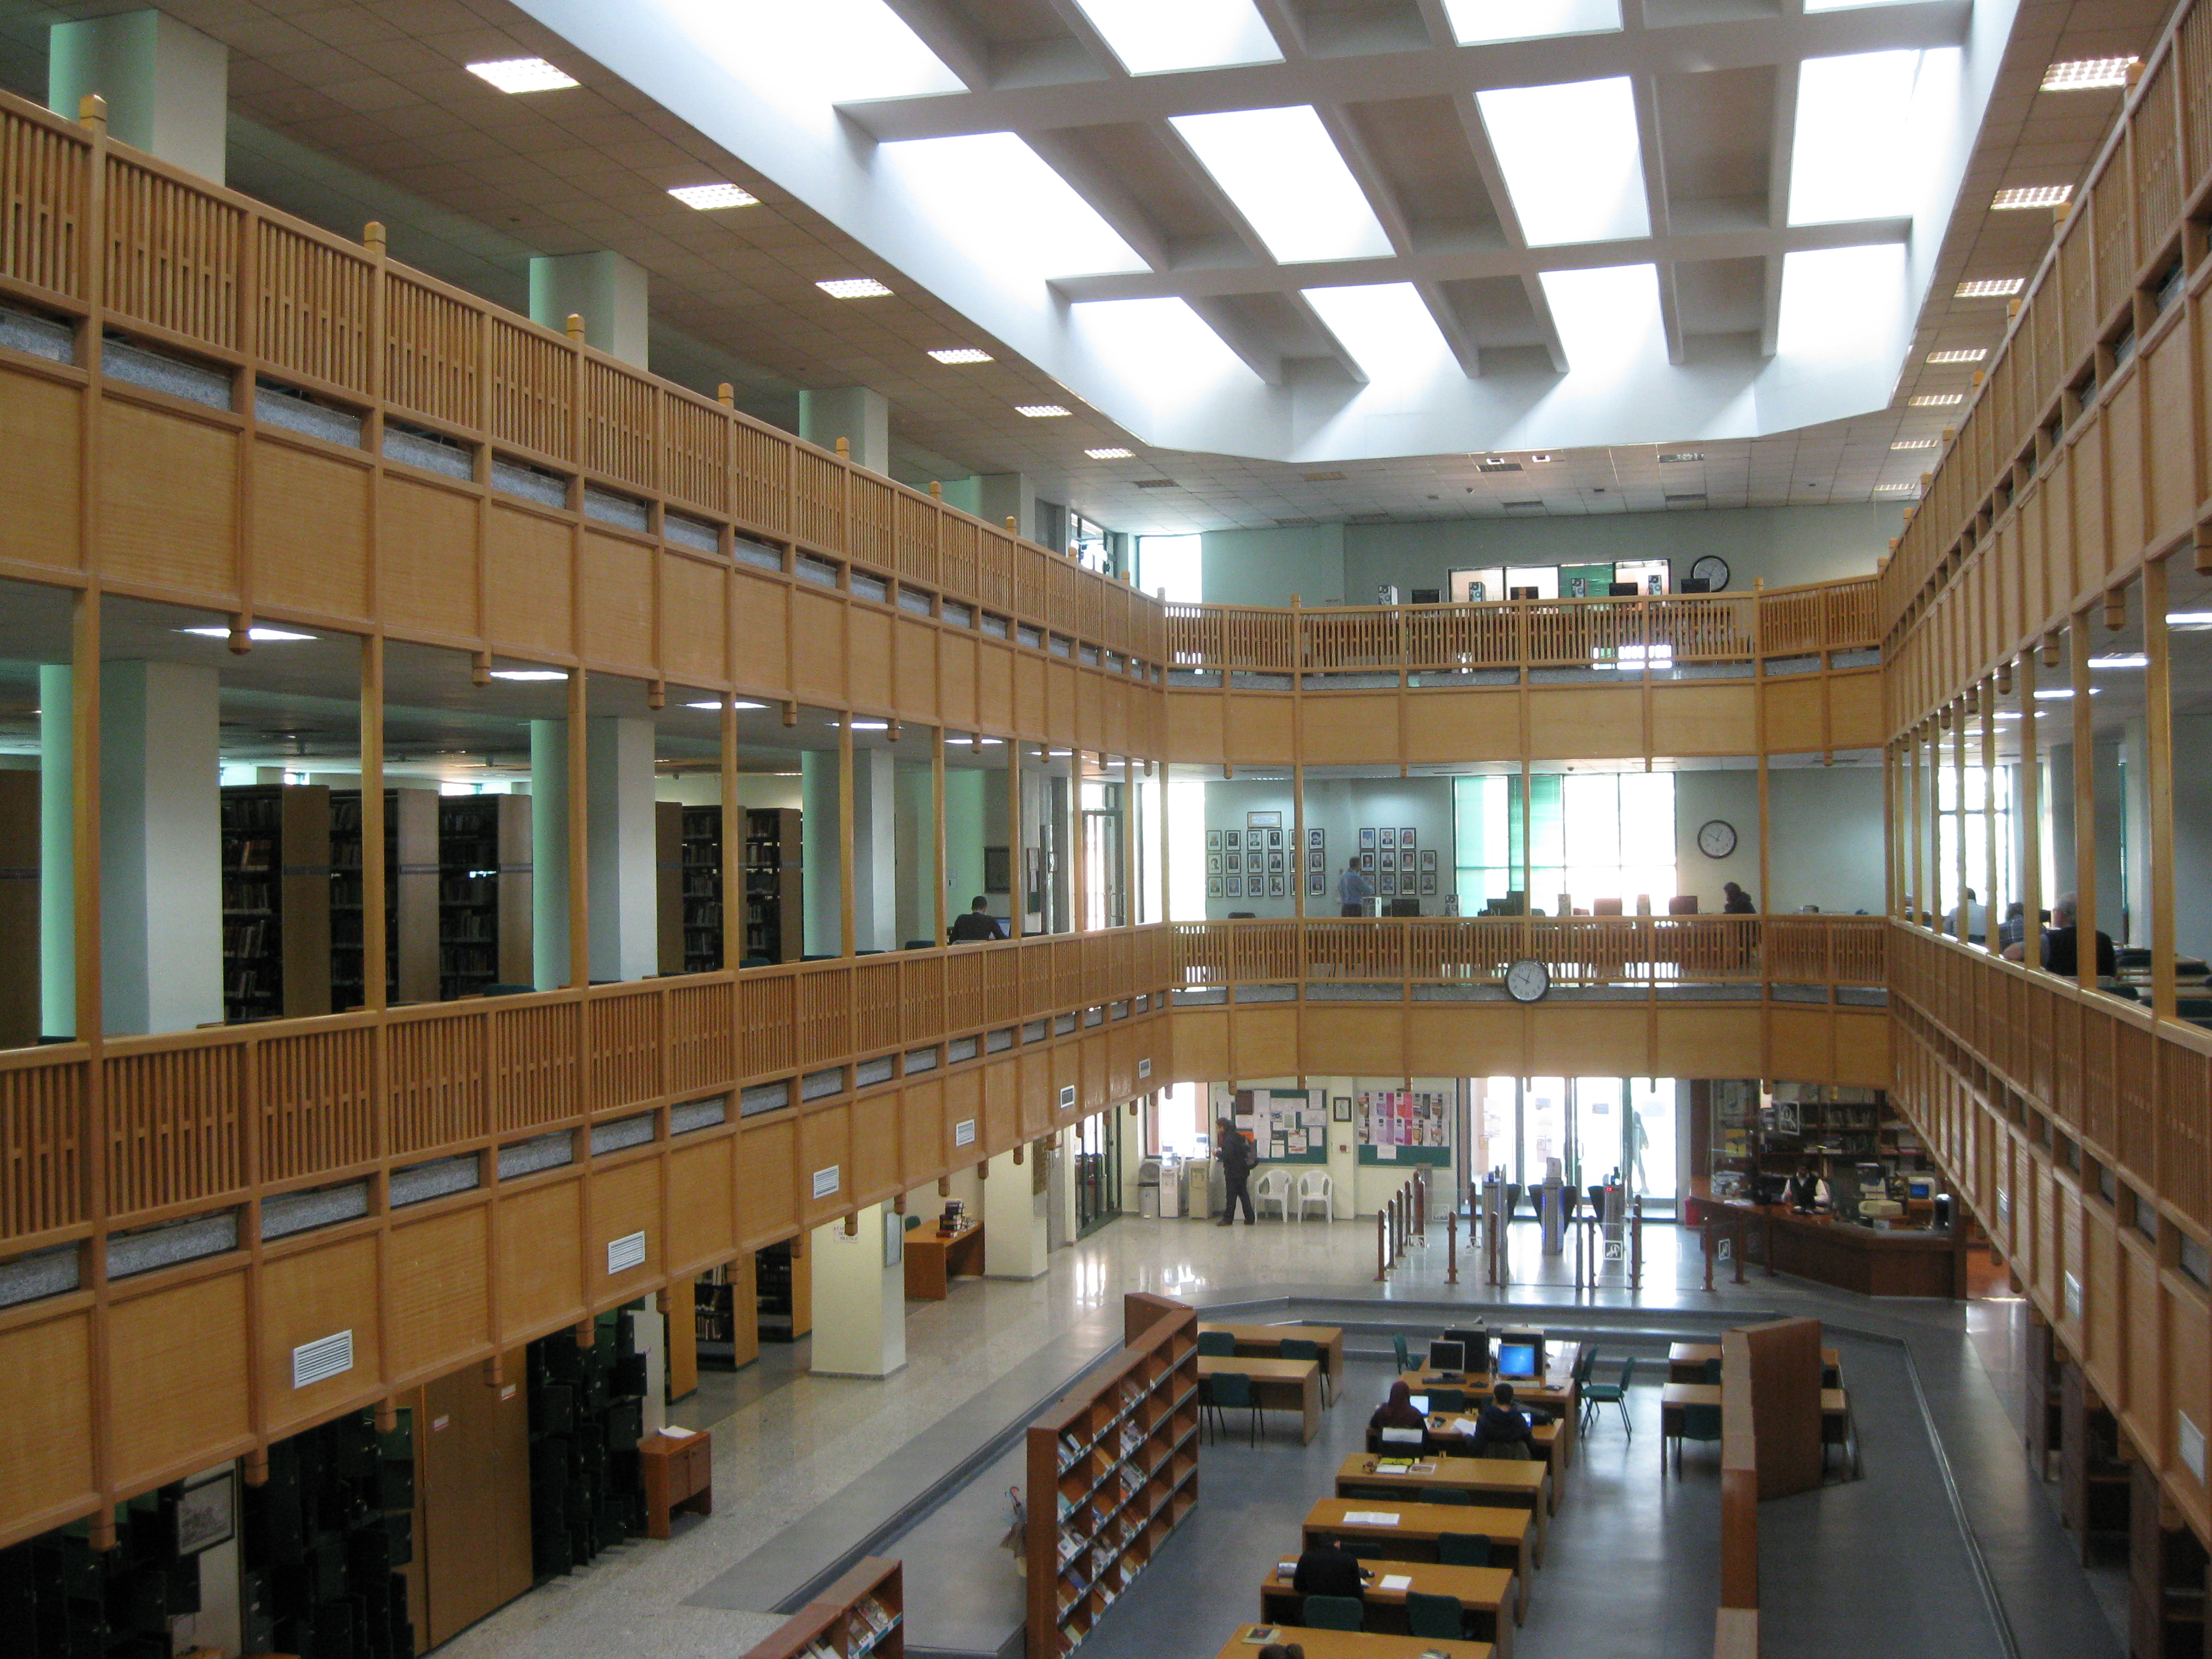 The interior of the İSAM library